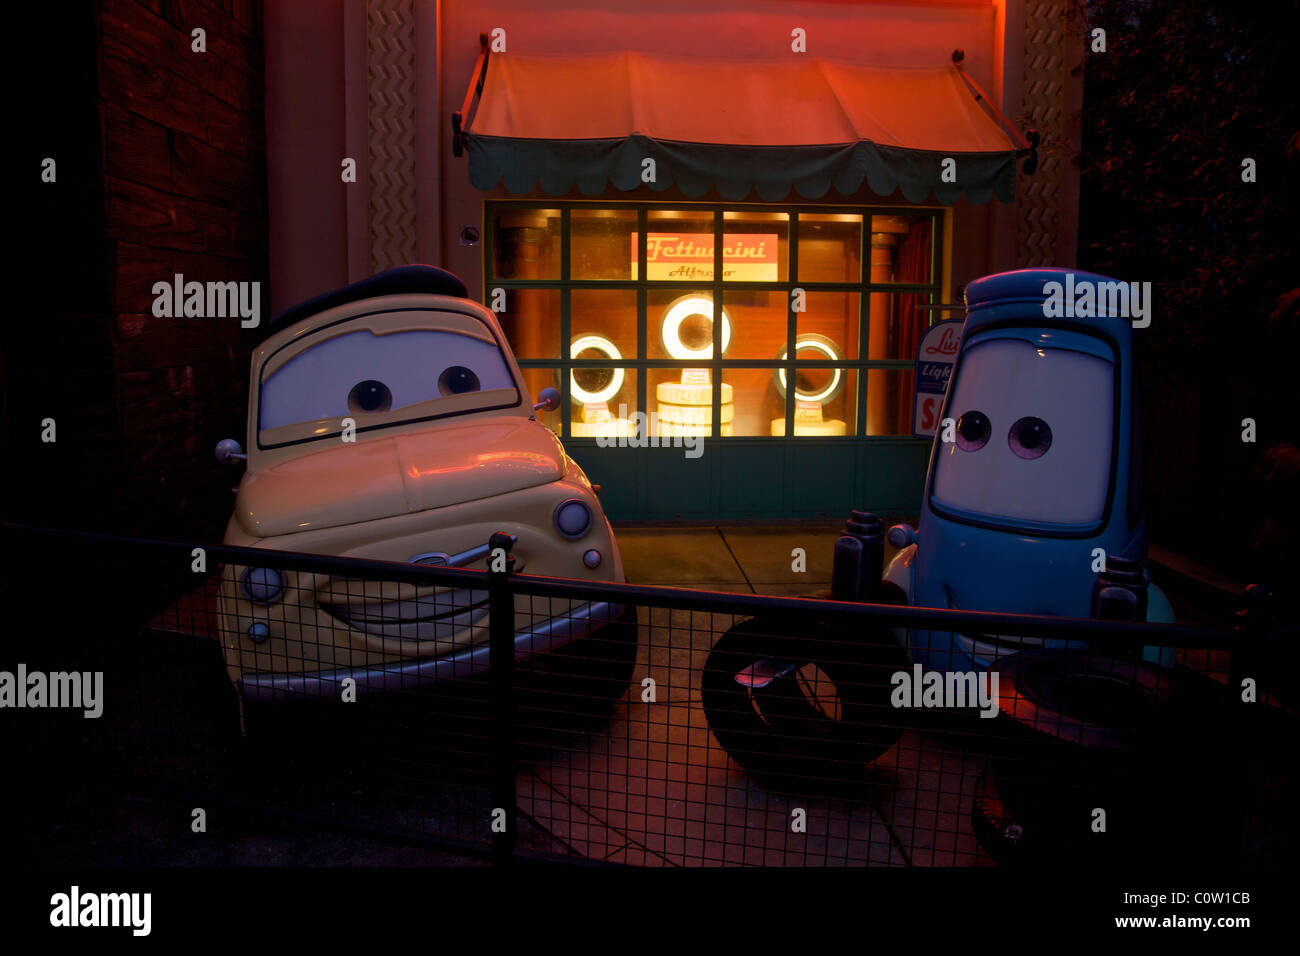 Statues of characters from the movie Cars at Walt Disney Studio Park near Paris France Stock Photo